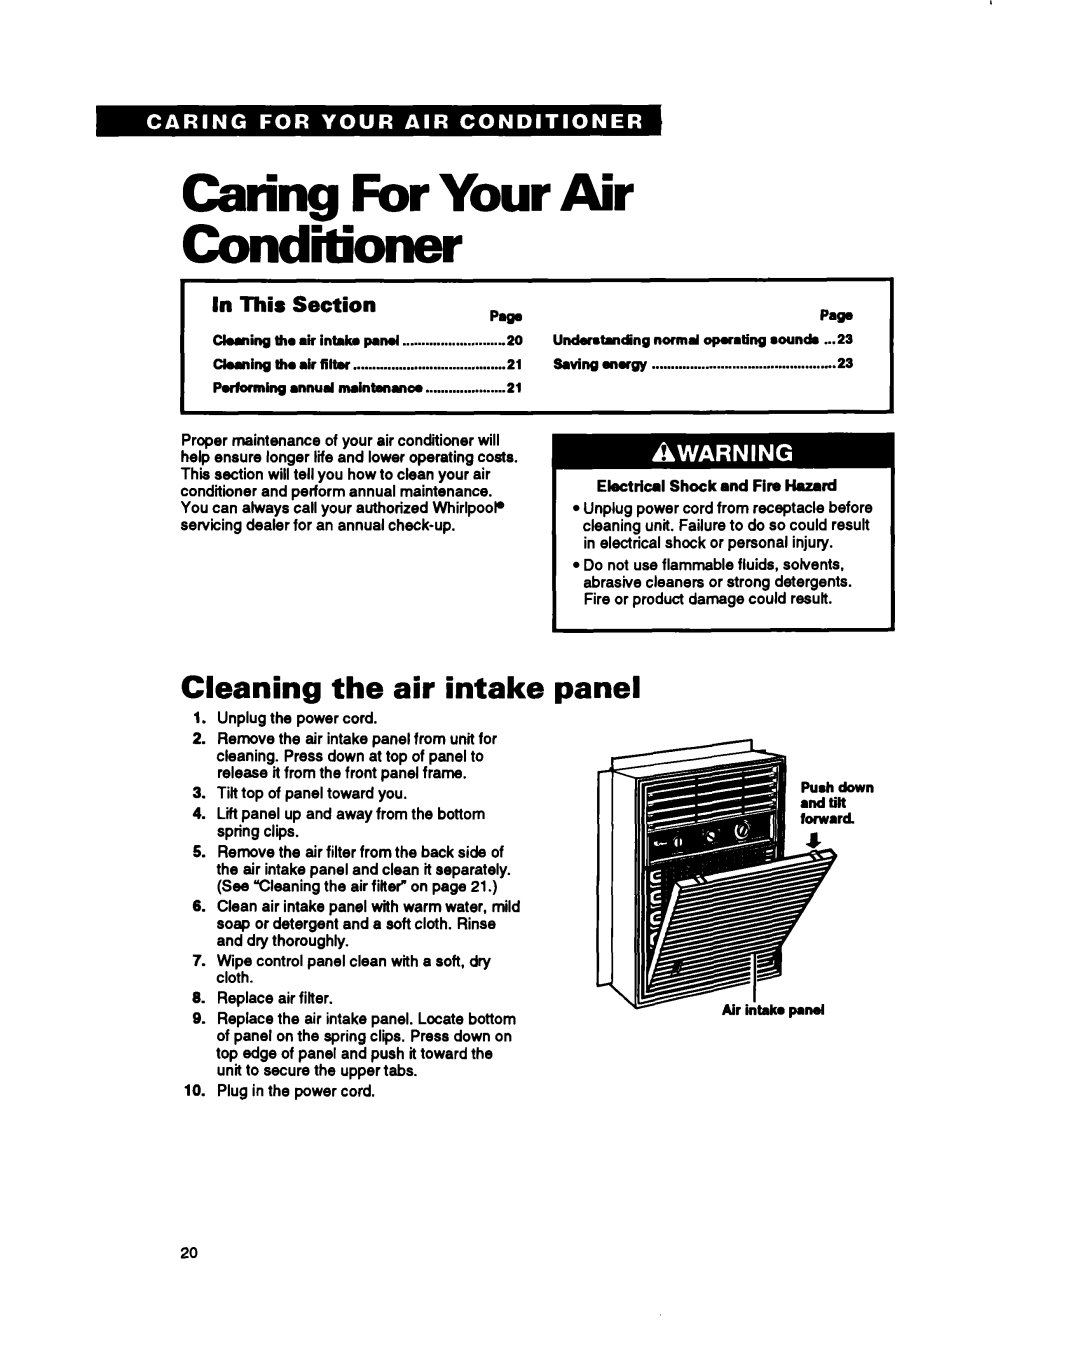 Whirlpool ACSIOZ ACS520 warranty Caring For Your, Conditioner, Cleaning the air intake panel, In This, Section 